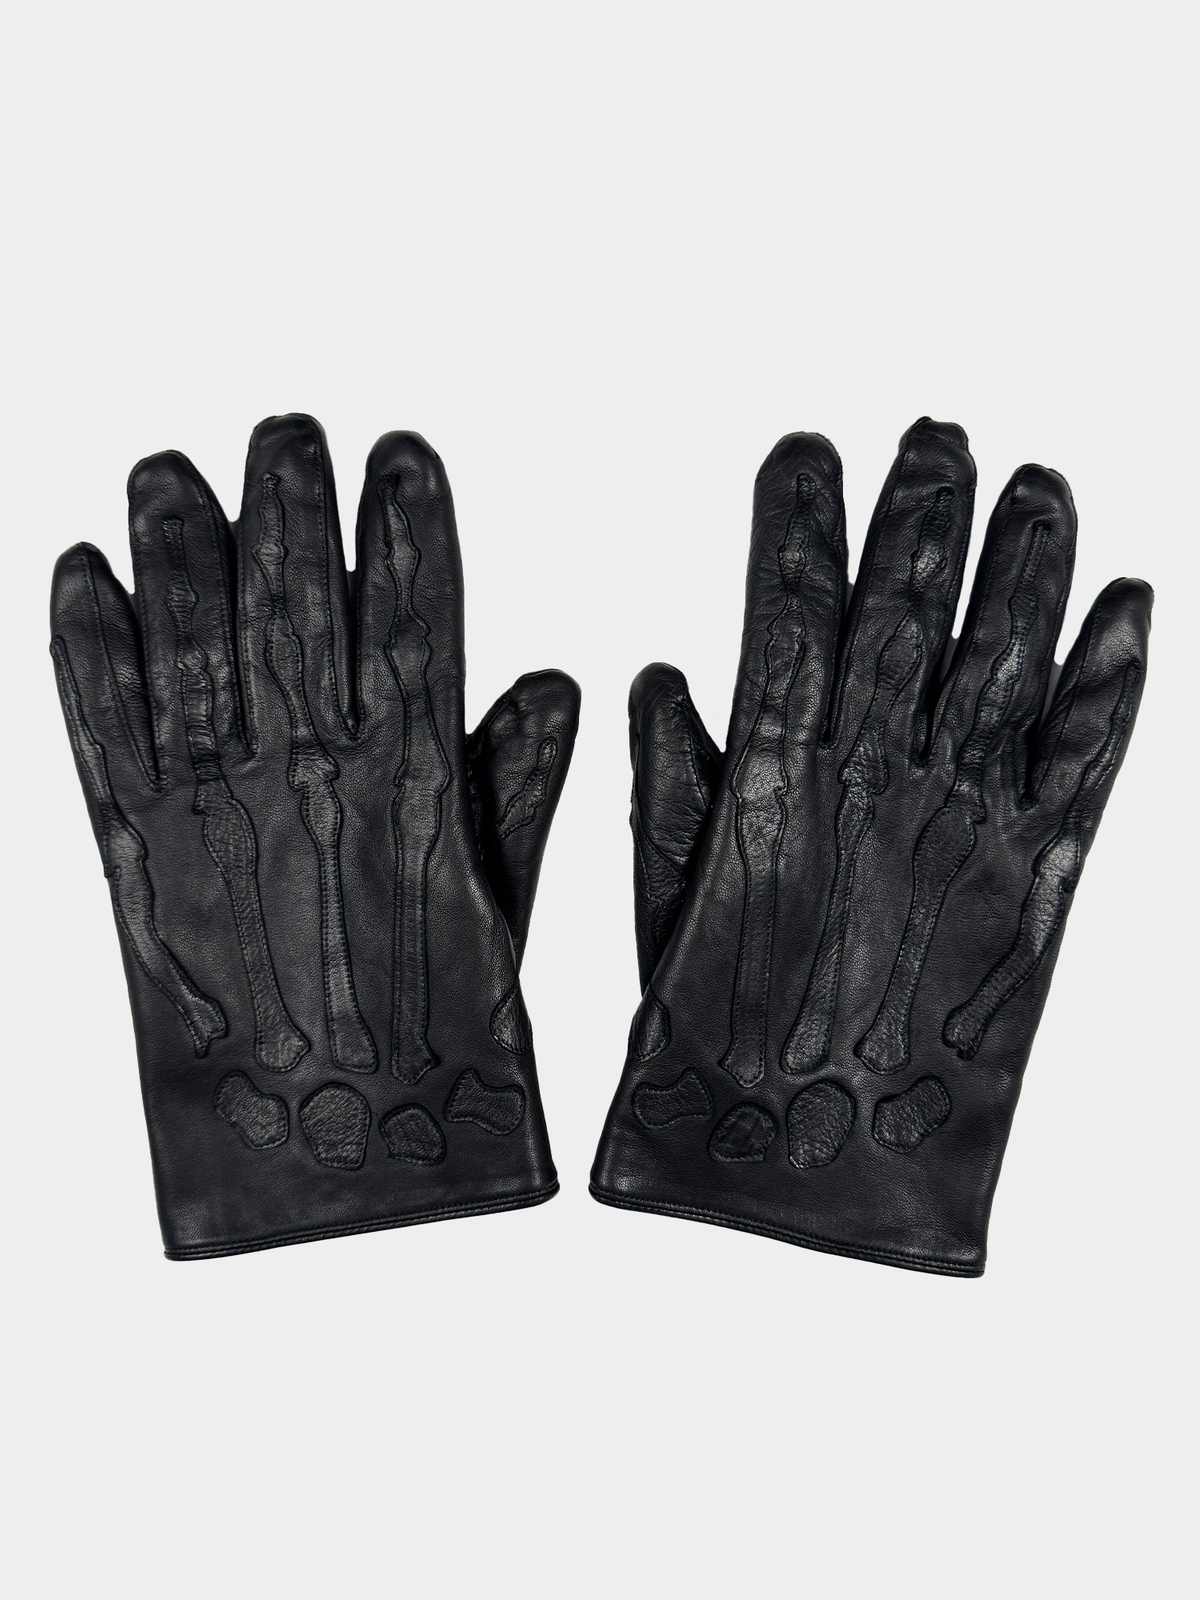 UNDERCOVER 'Paper Doll' Leather Gloves - ARCHIVED